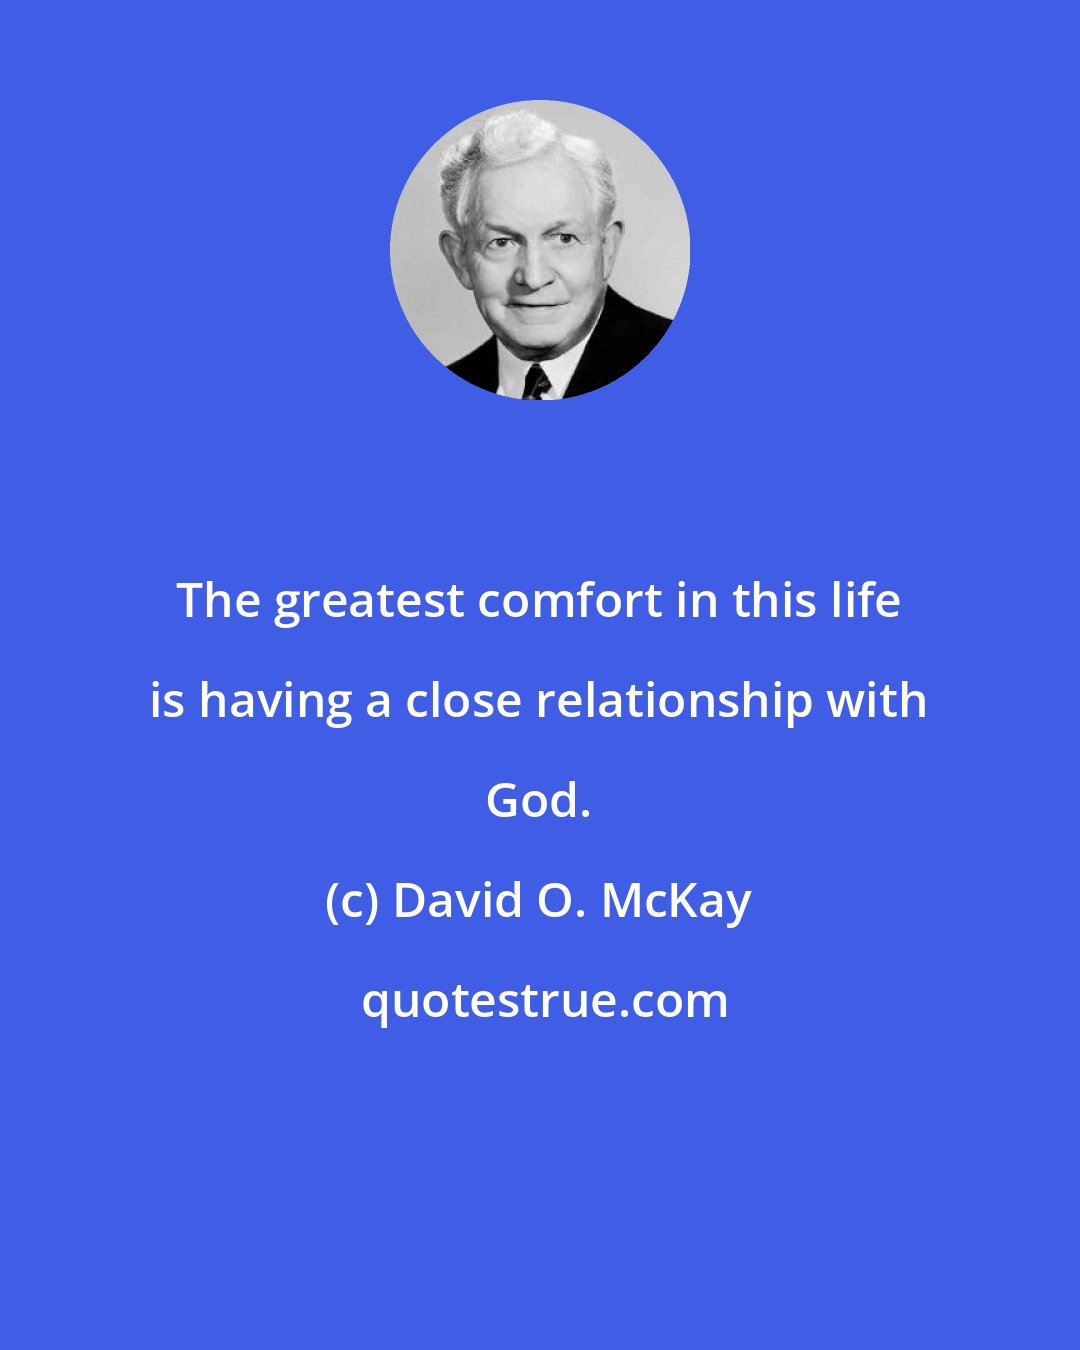 David O. McKay: The greatest comfort in this life is having a close relationship with God.